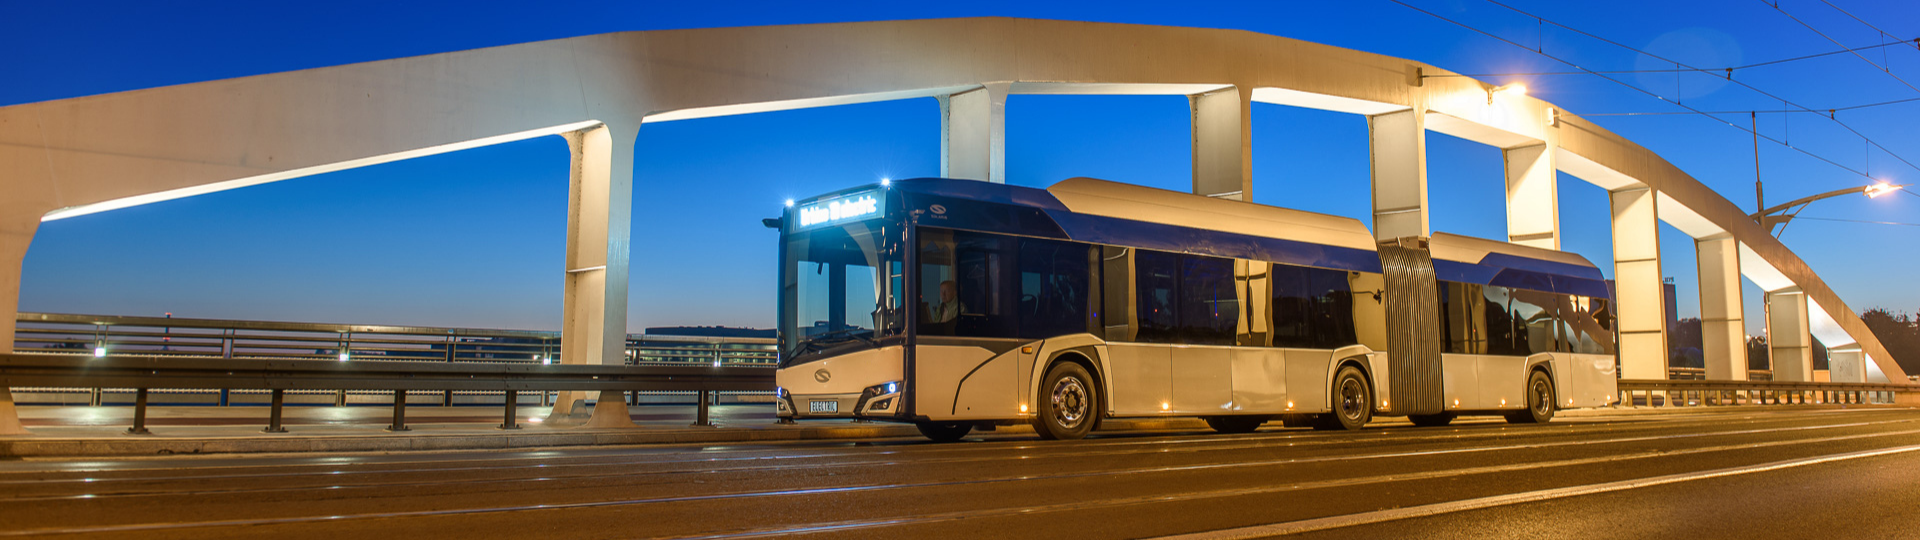 More Solaris buses to Dortmund, this time electric ones